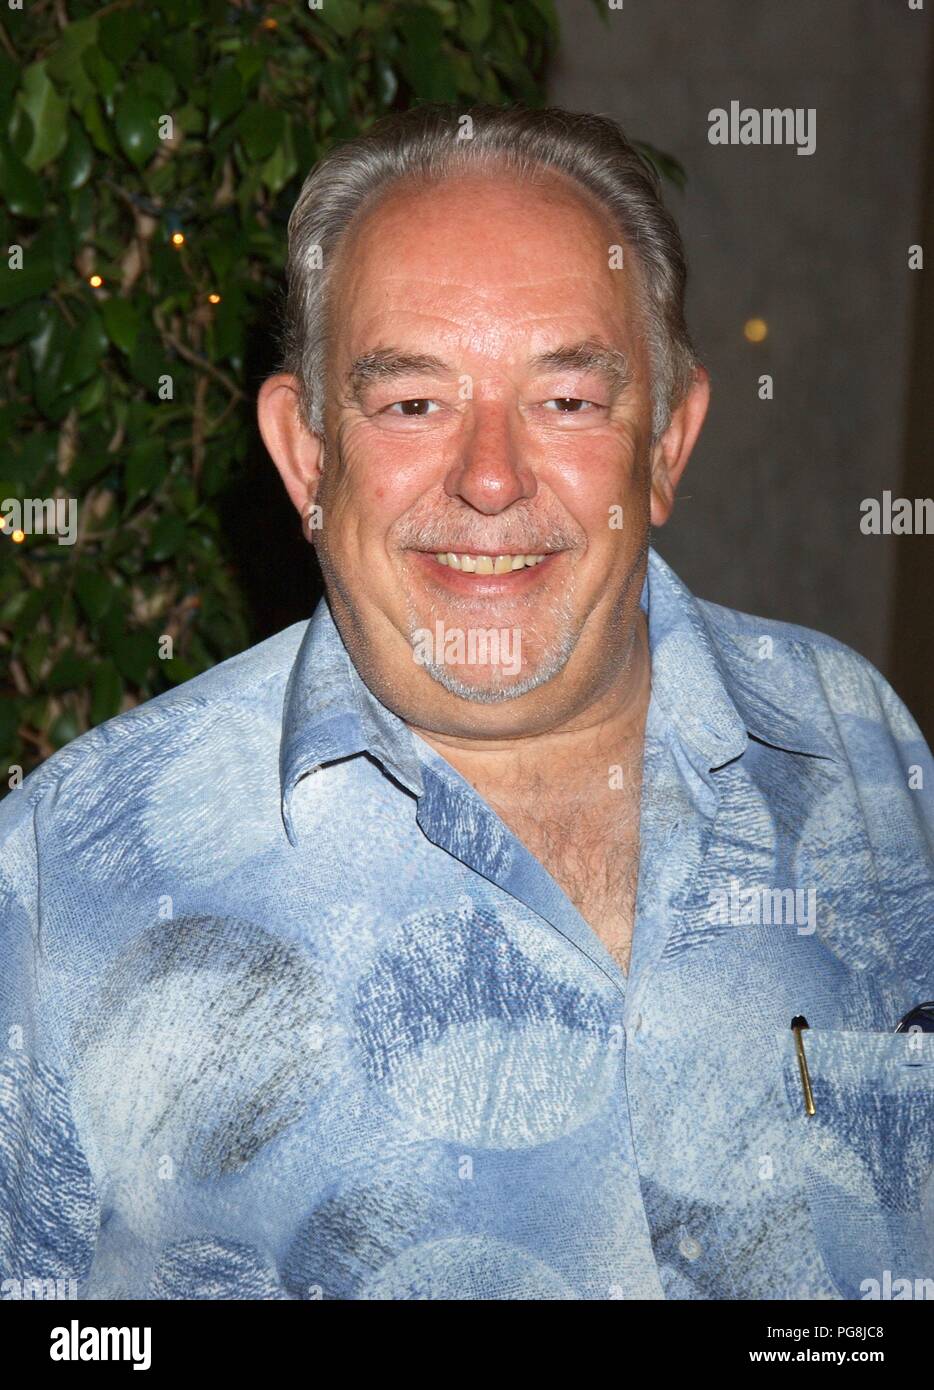 Beverly Hills, California, USA. 5th June, 2004. ROBIN LEACH during the 1st Annual Golden Needle Awards Luncheon and Fashion Show held at the Regent Beverly Wilshire Hotel. Credit: Laura Farr/AdMedia/ZUMA Wire/Alamy Live News Stock Photo